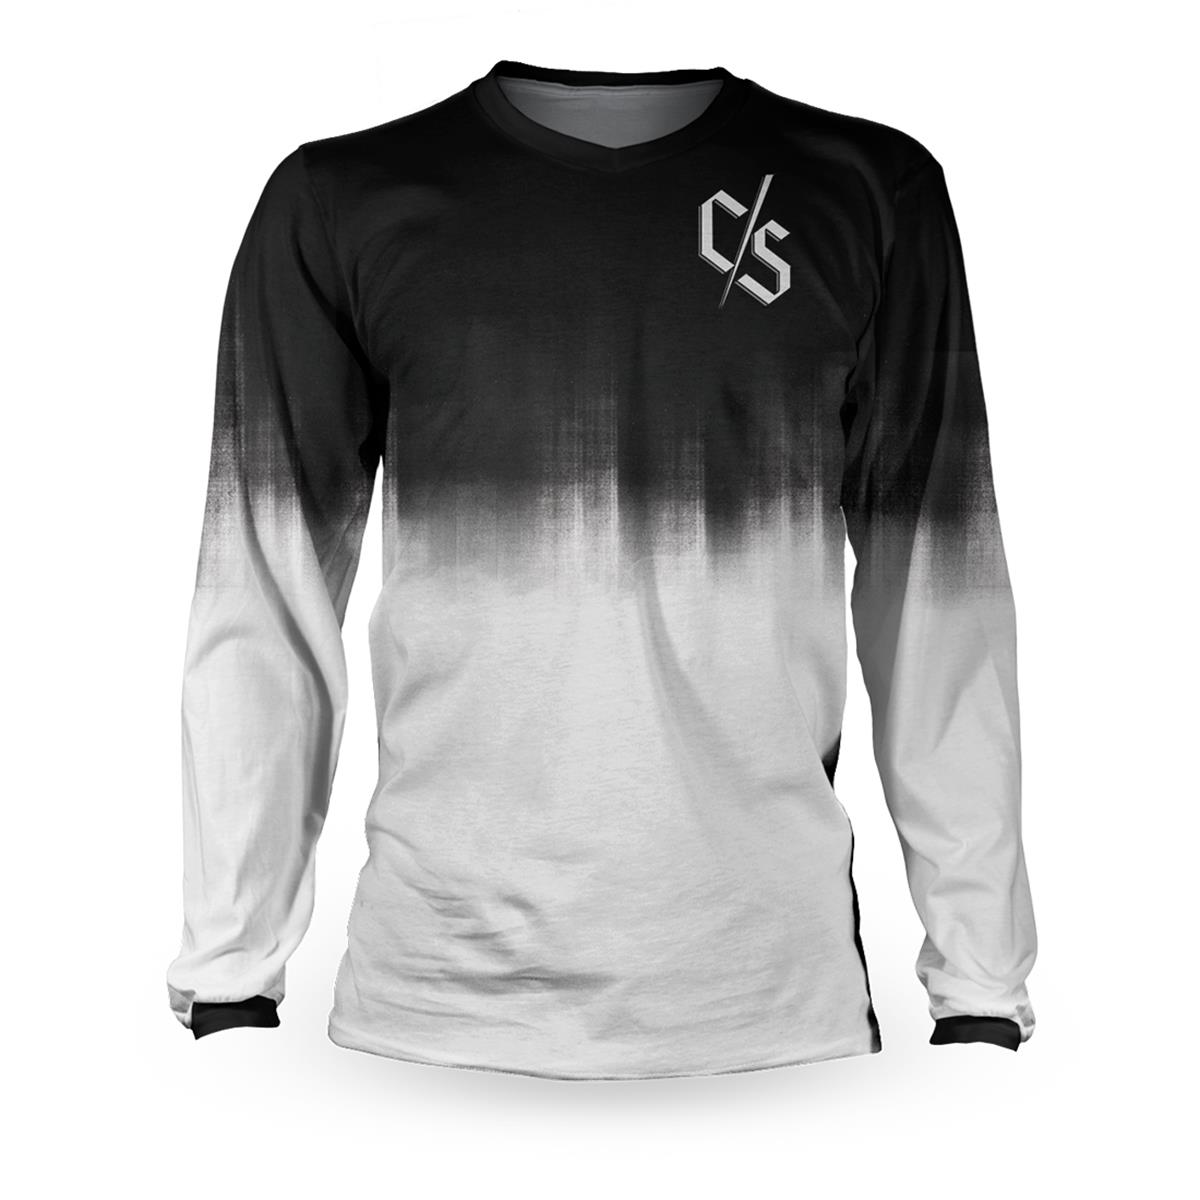 Loose Riders Downhill Jersey Long Sleeve C/S Dipped White/Black